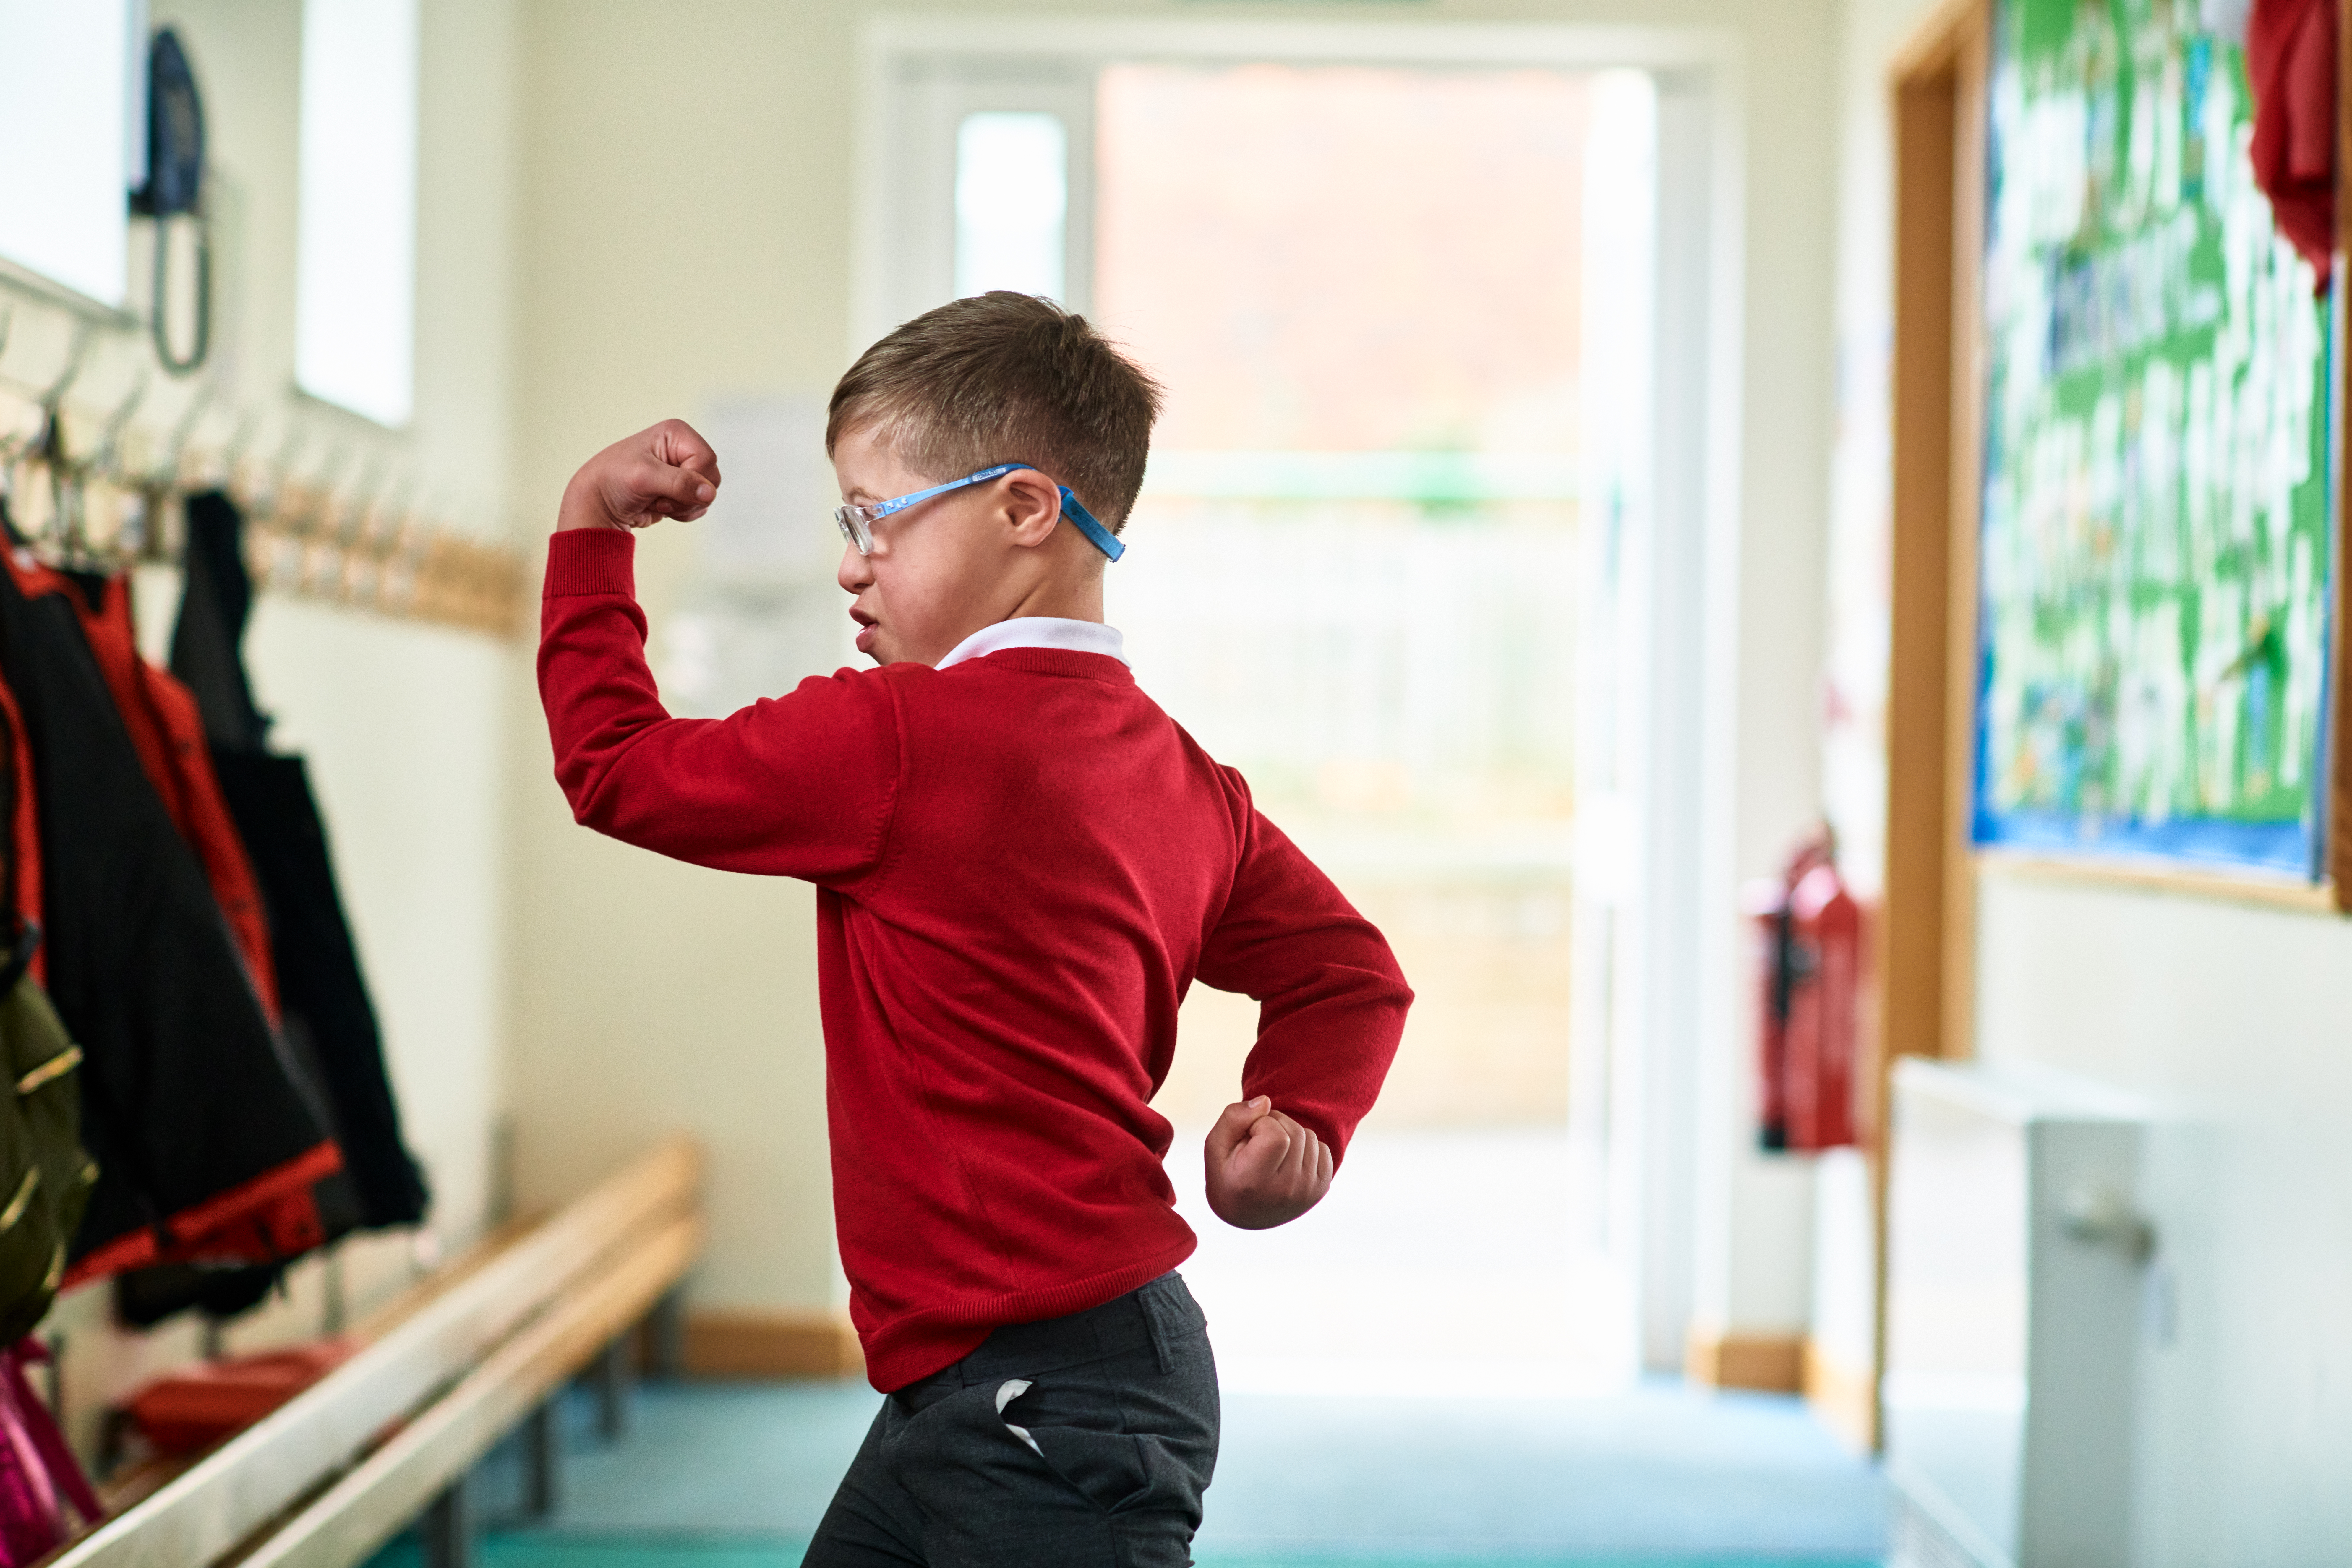 Boy with Down syndrome flexing muscles in school corridor | Source: Getty Images